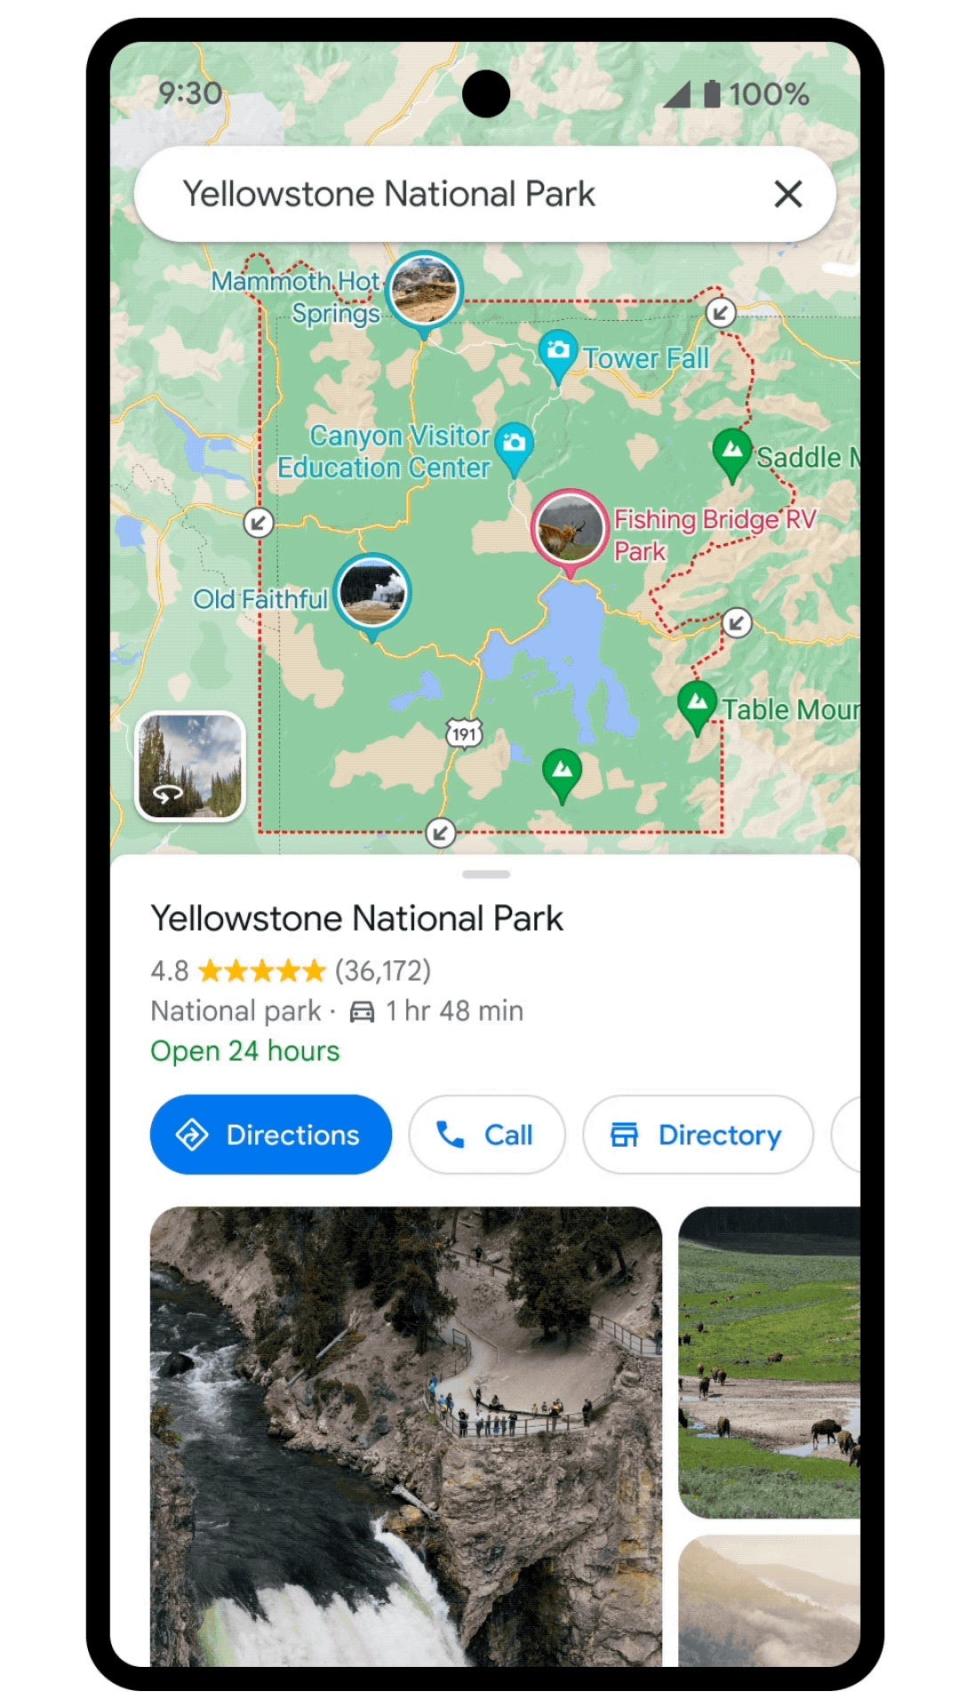 Photo highlights allow Google Maps user to see points of interest in national parks.